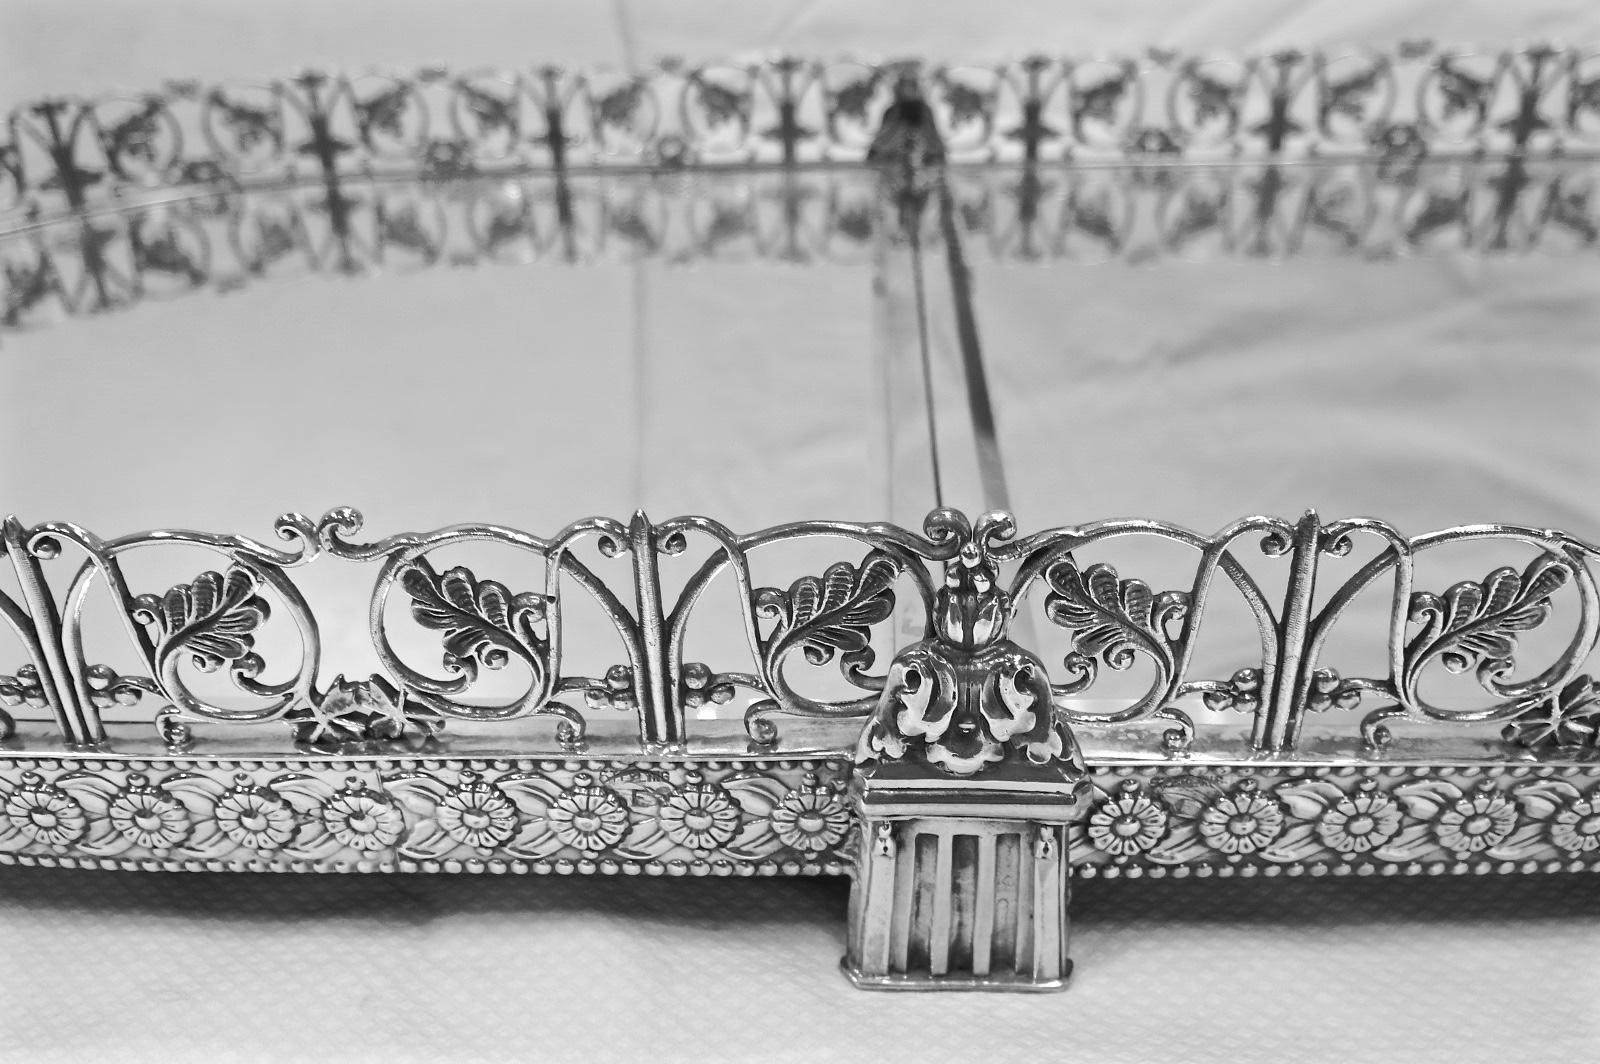 4 section, sterling silver table plateau with mirrored top. The 4 sections measure 65